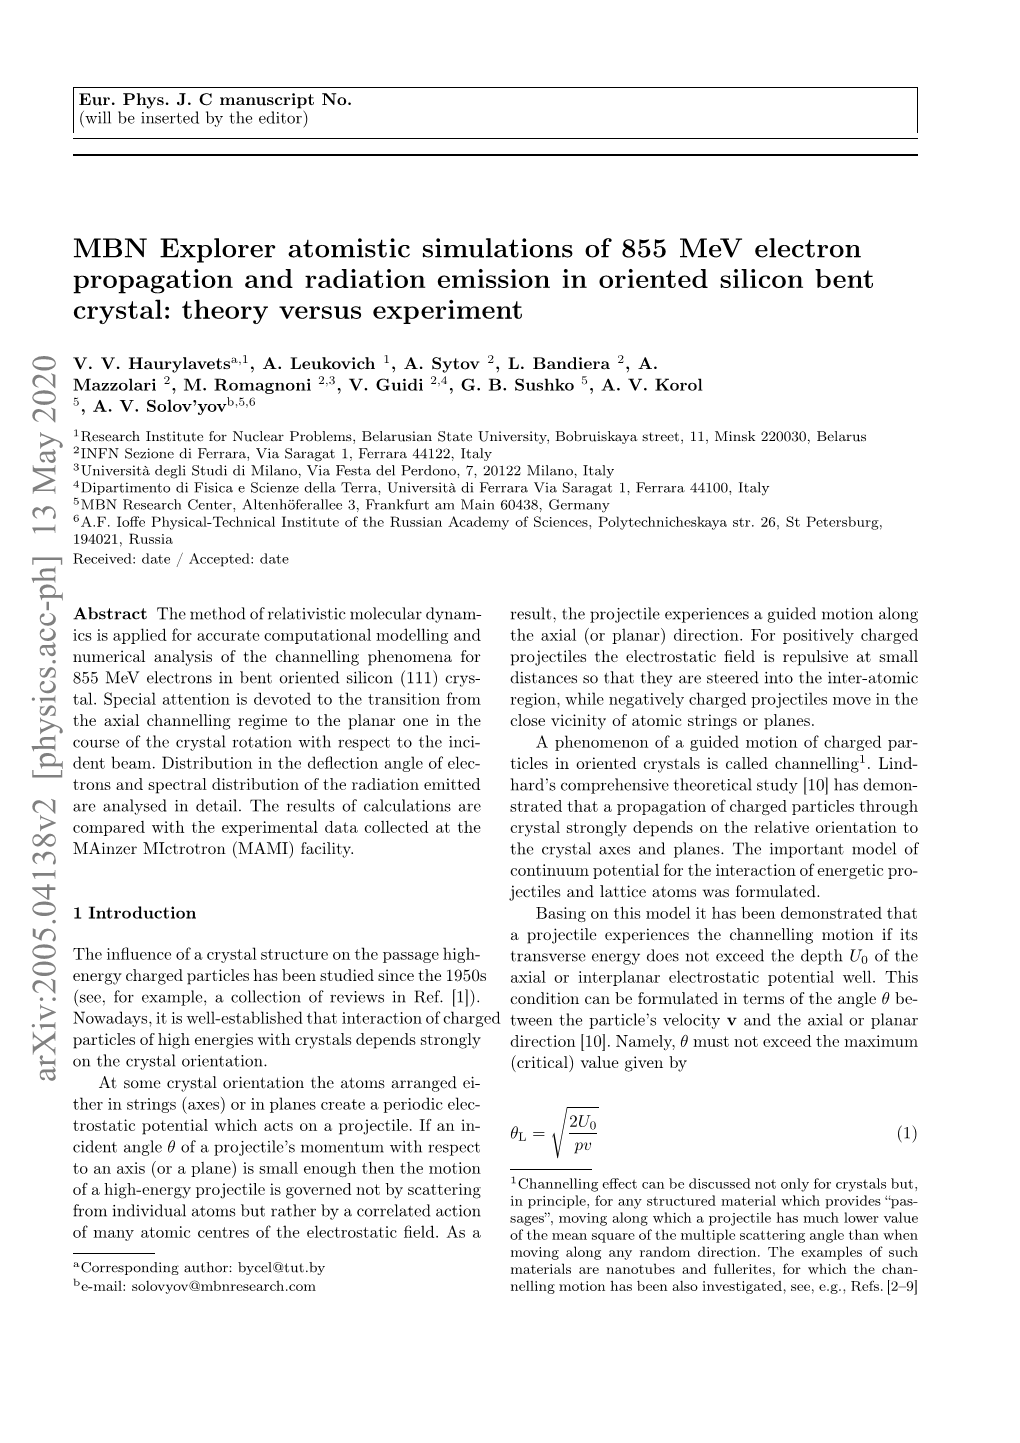 MBN Explorer Atomistic Simulations of 855 Mev Electron Propagation And